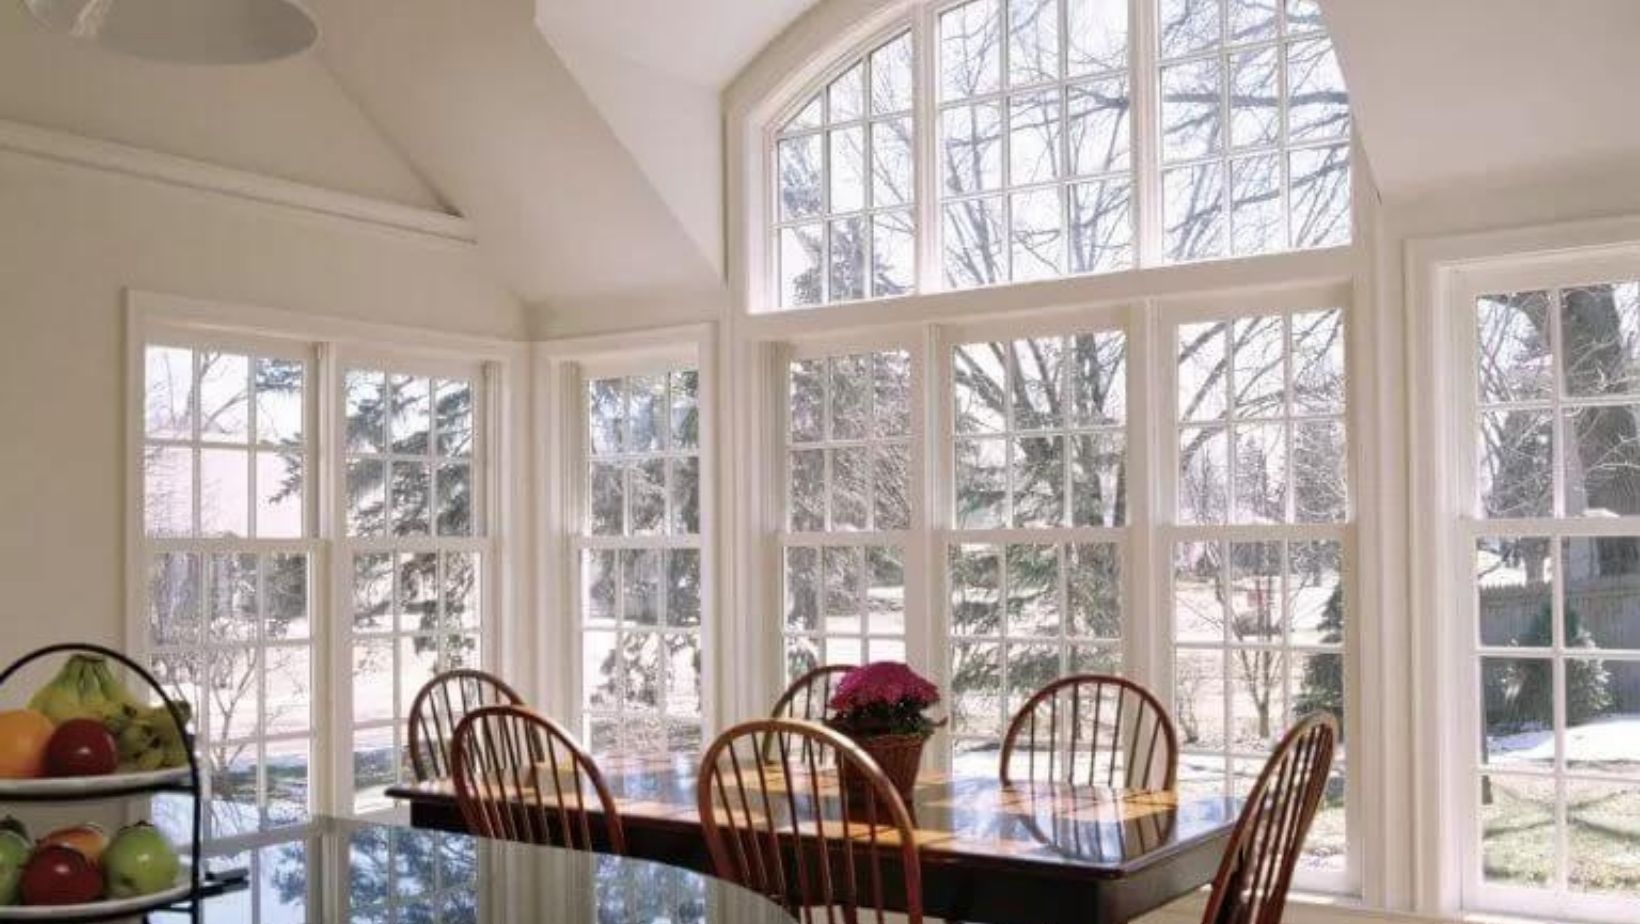 A dining room with big windows covering one wall with a dining table.